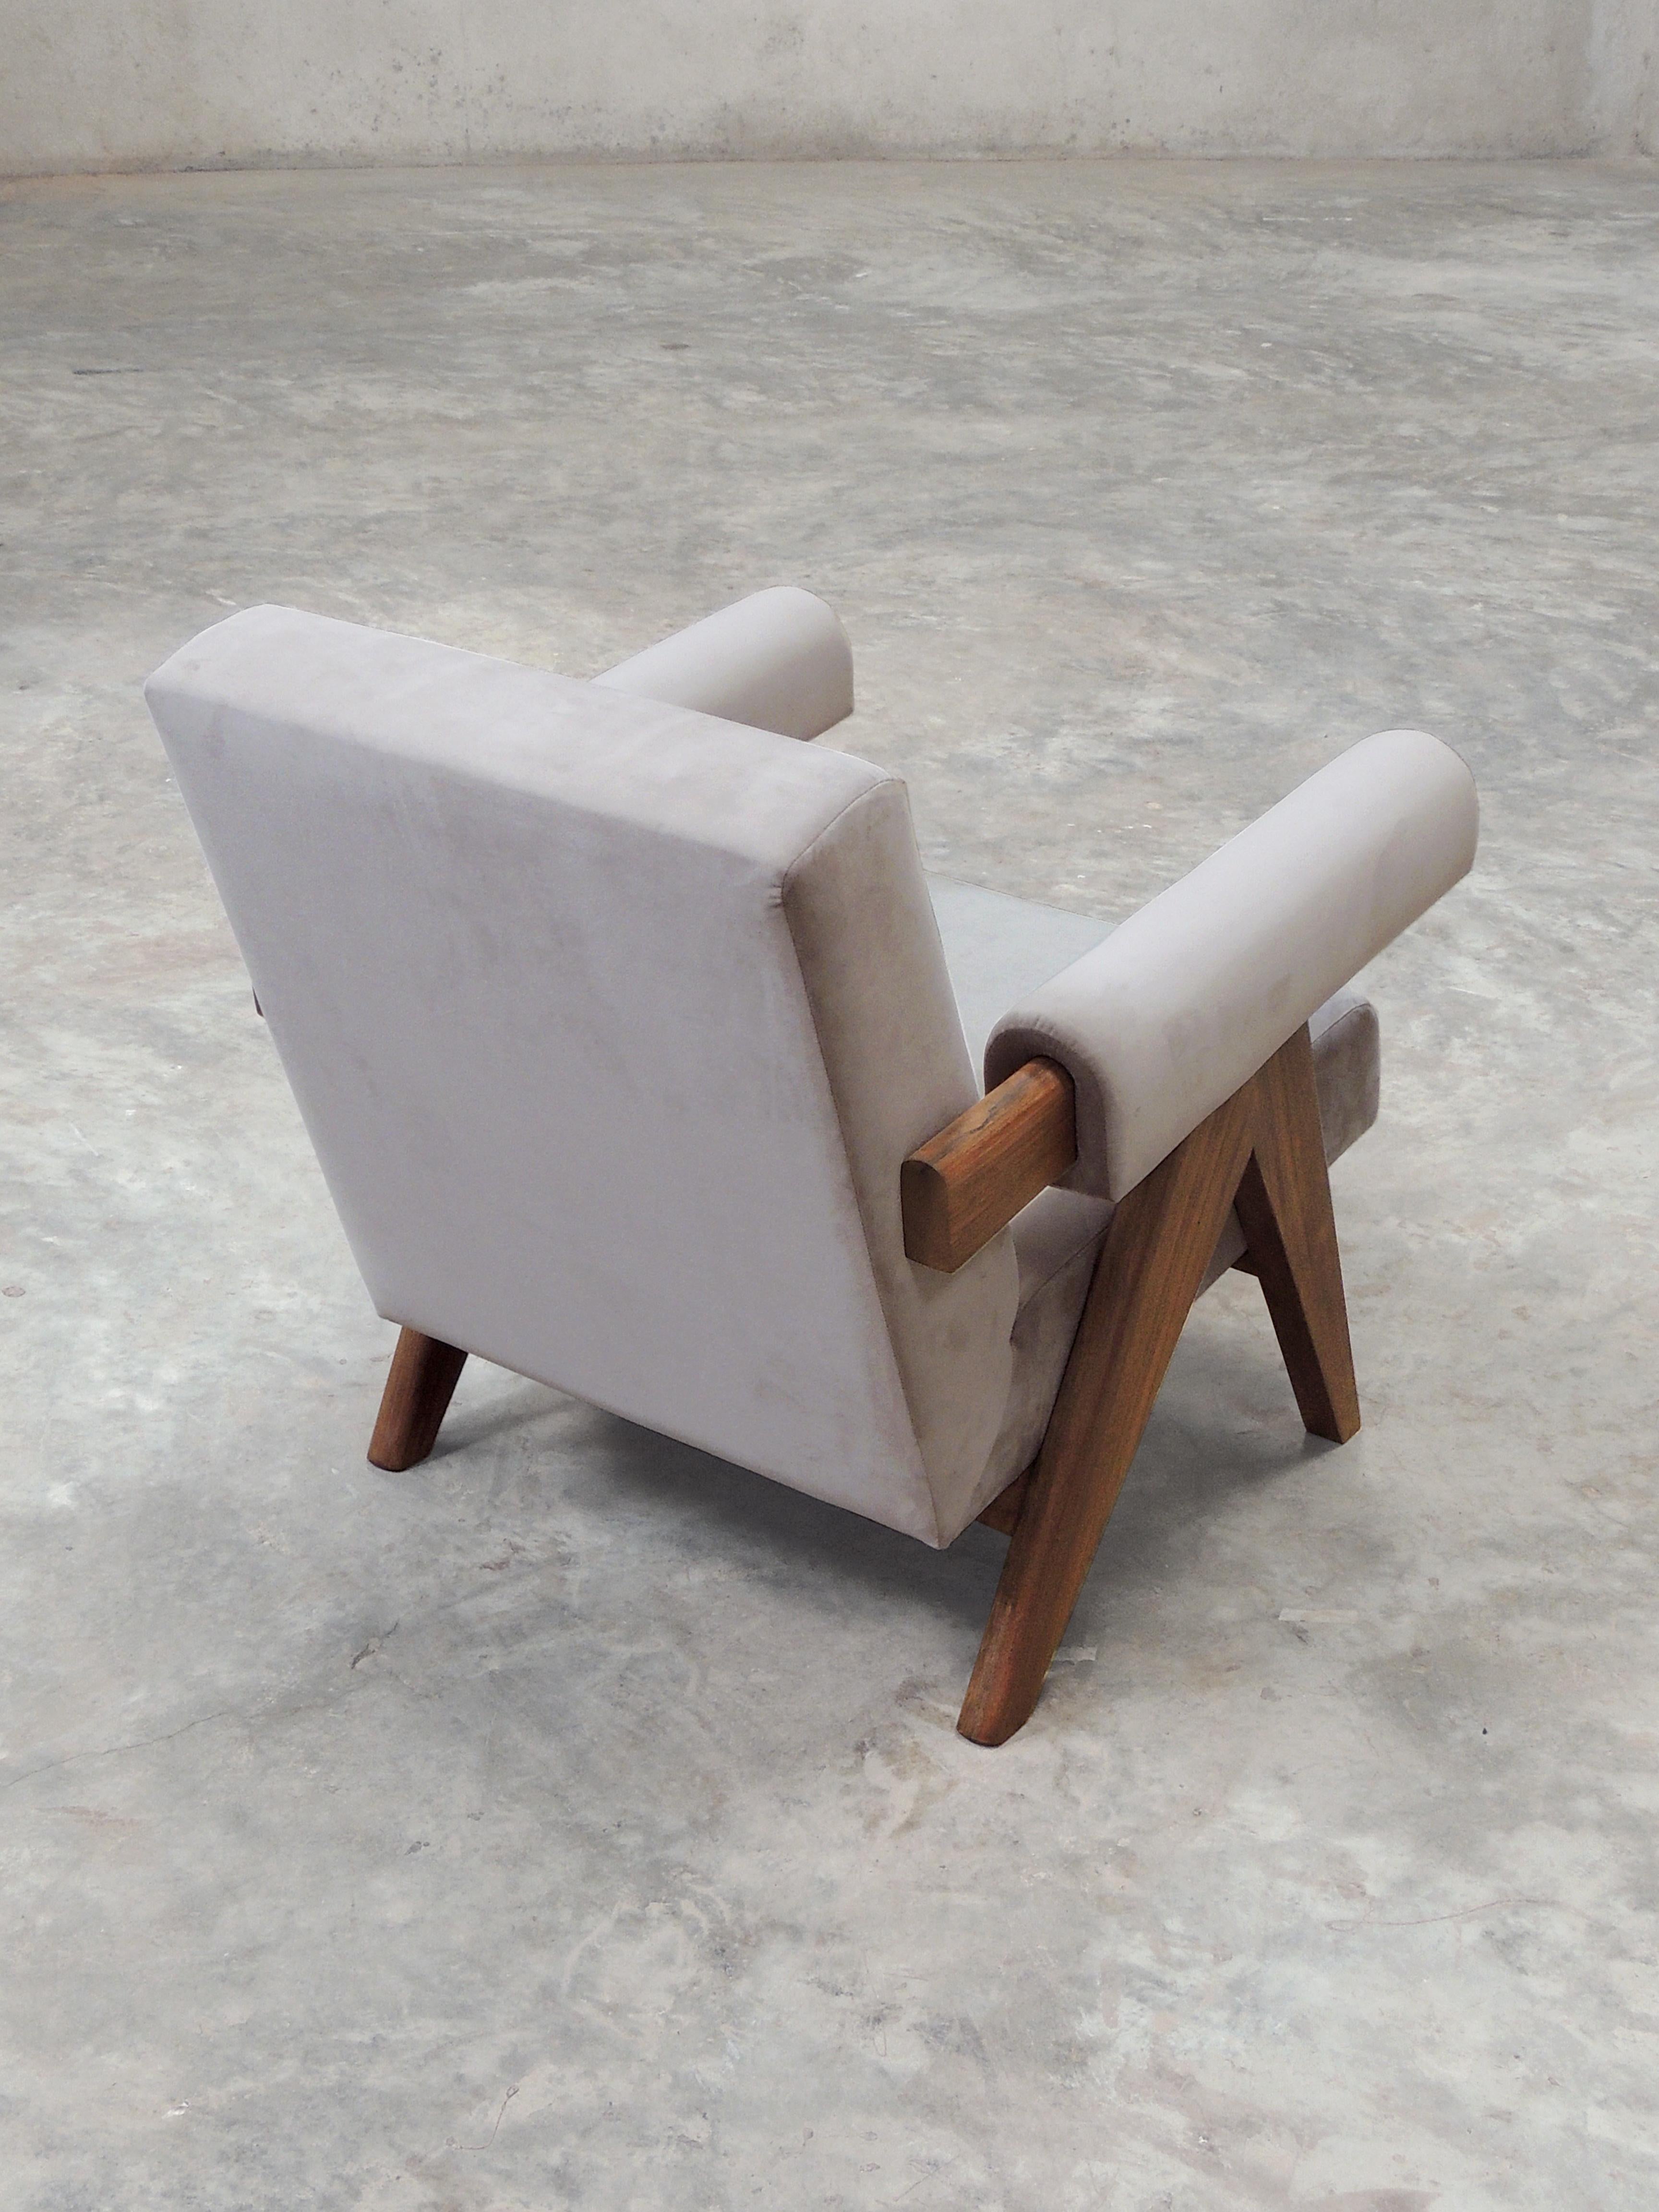 Wood Pierre Jeanneret's Upholstered Armchair, Hand-Sculpted Contemporary Reedition